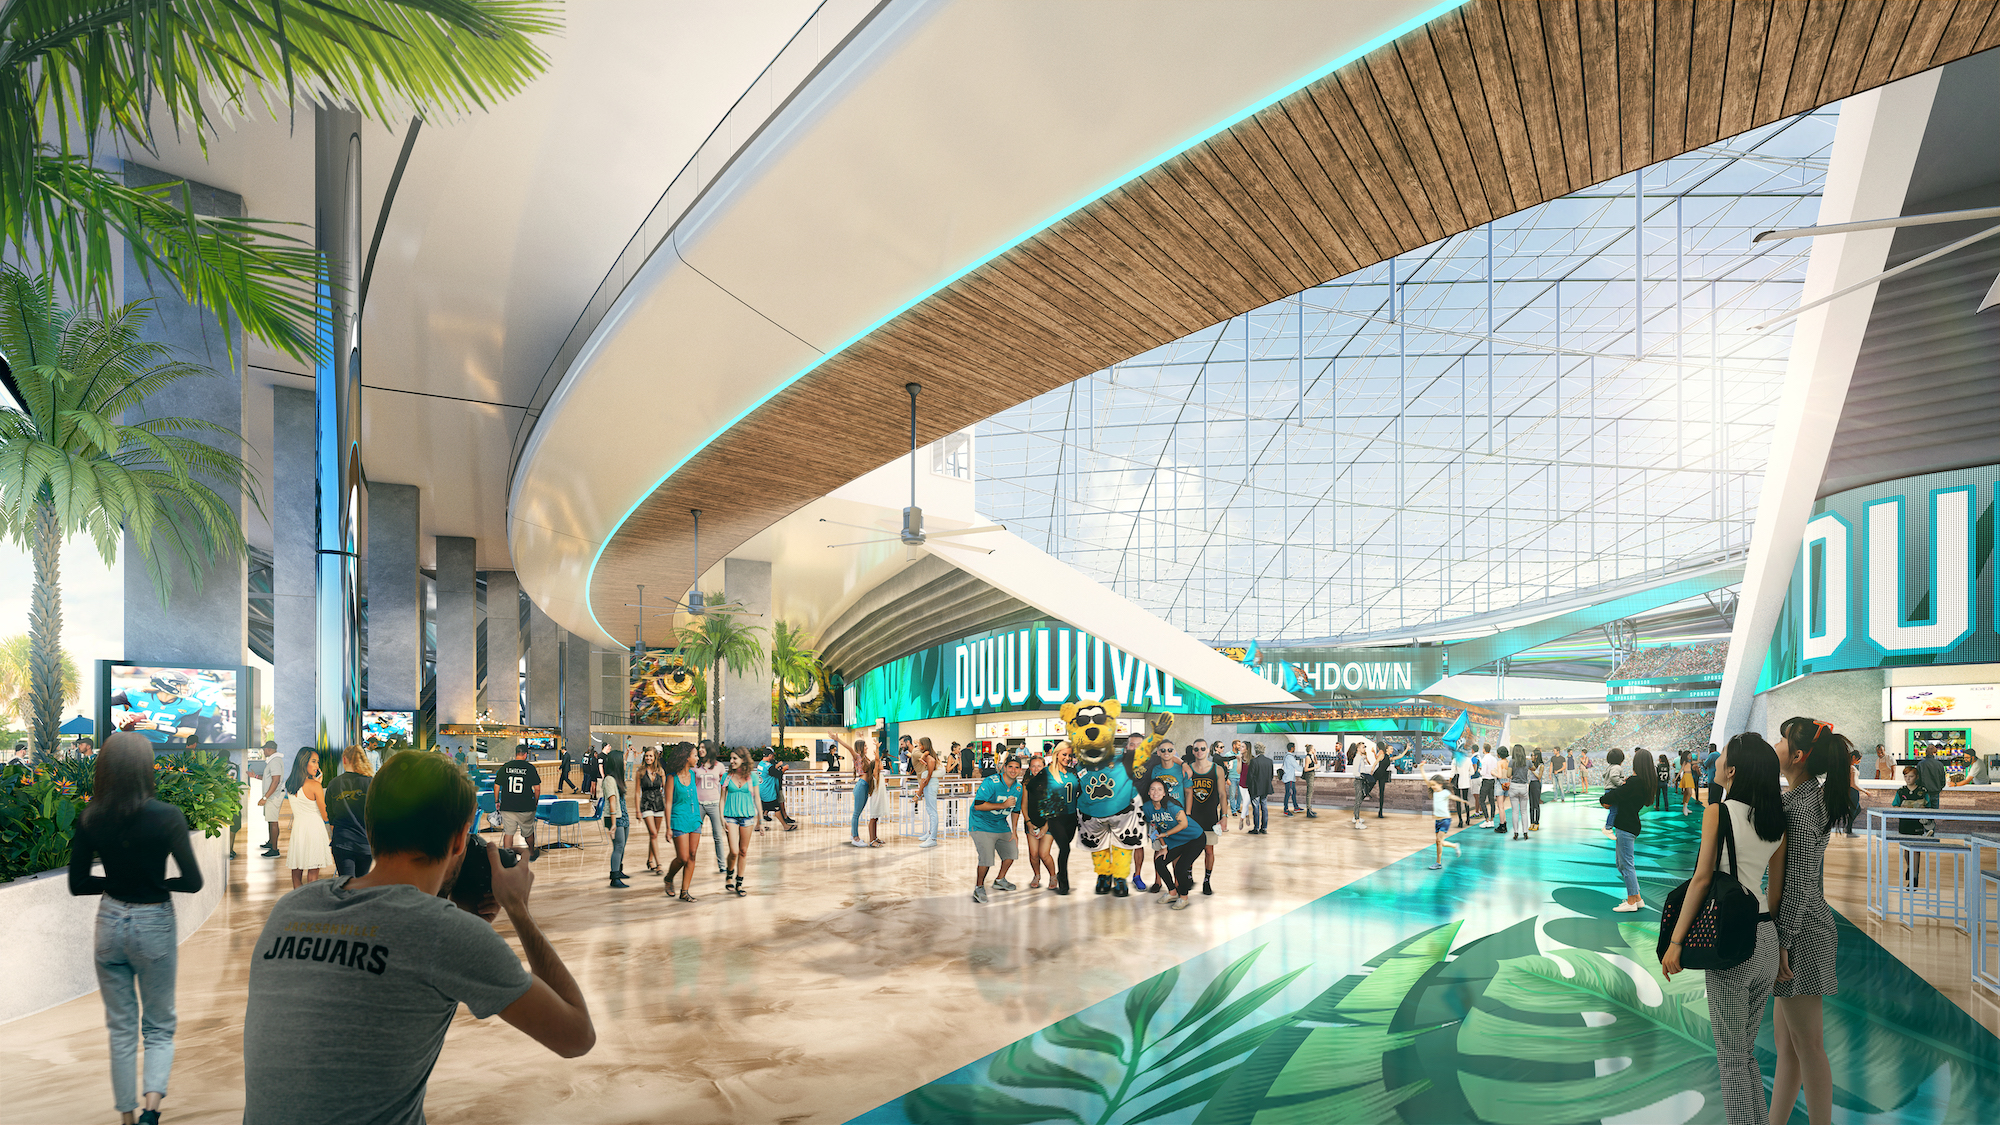 The Jacksonville Jaguars release the conceptual designs of their ‘stadium of the future’  